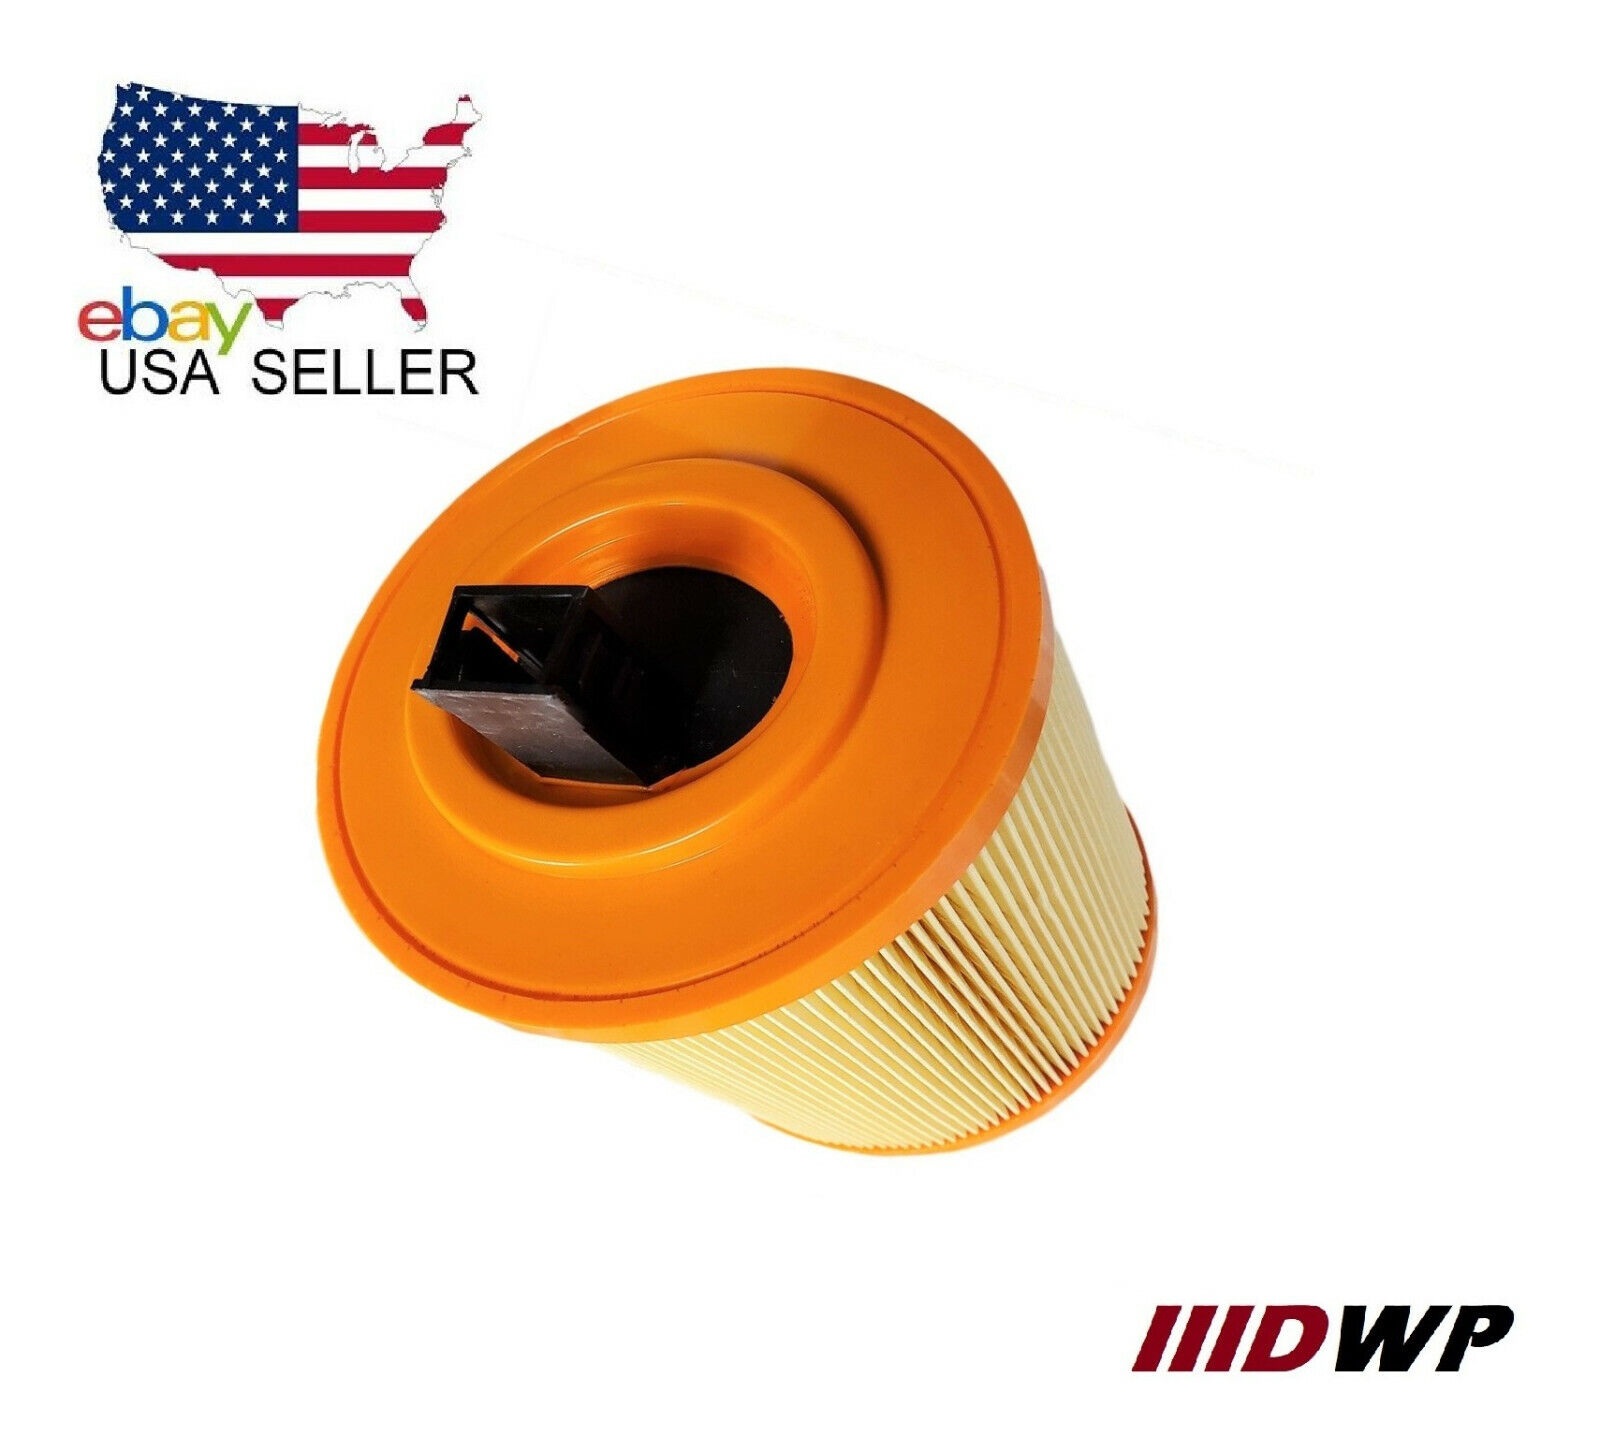 ENGINE AIR FILTER FOR 2016 - 2019 CHEVROLET CRUZE 1.4L & CADILLAC ATS 3.6L.TURBO